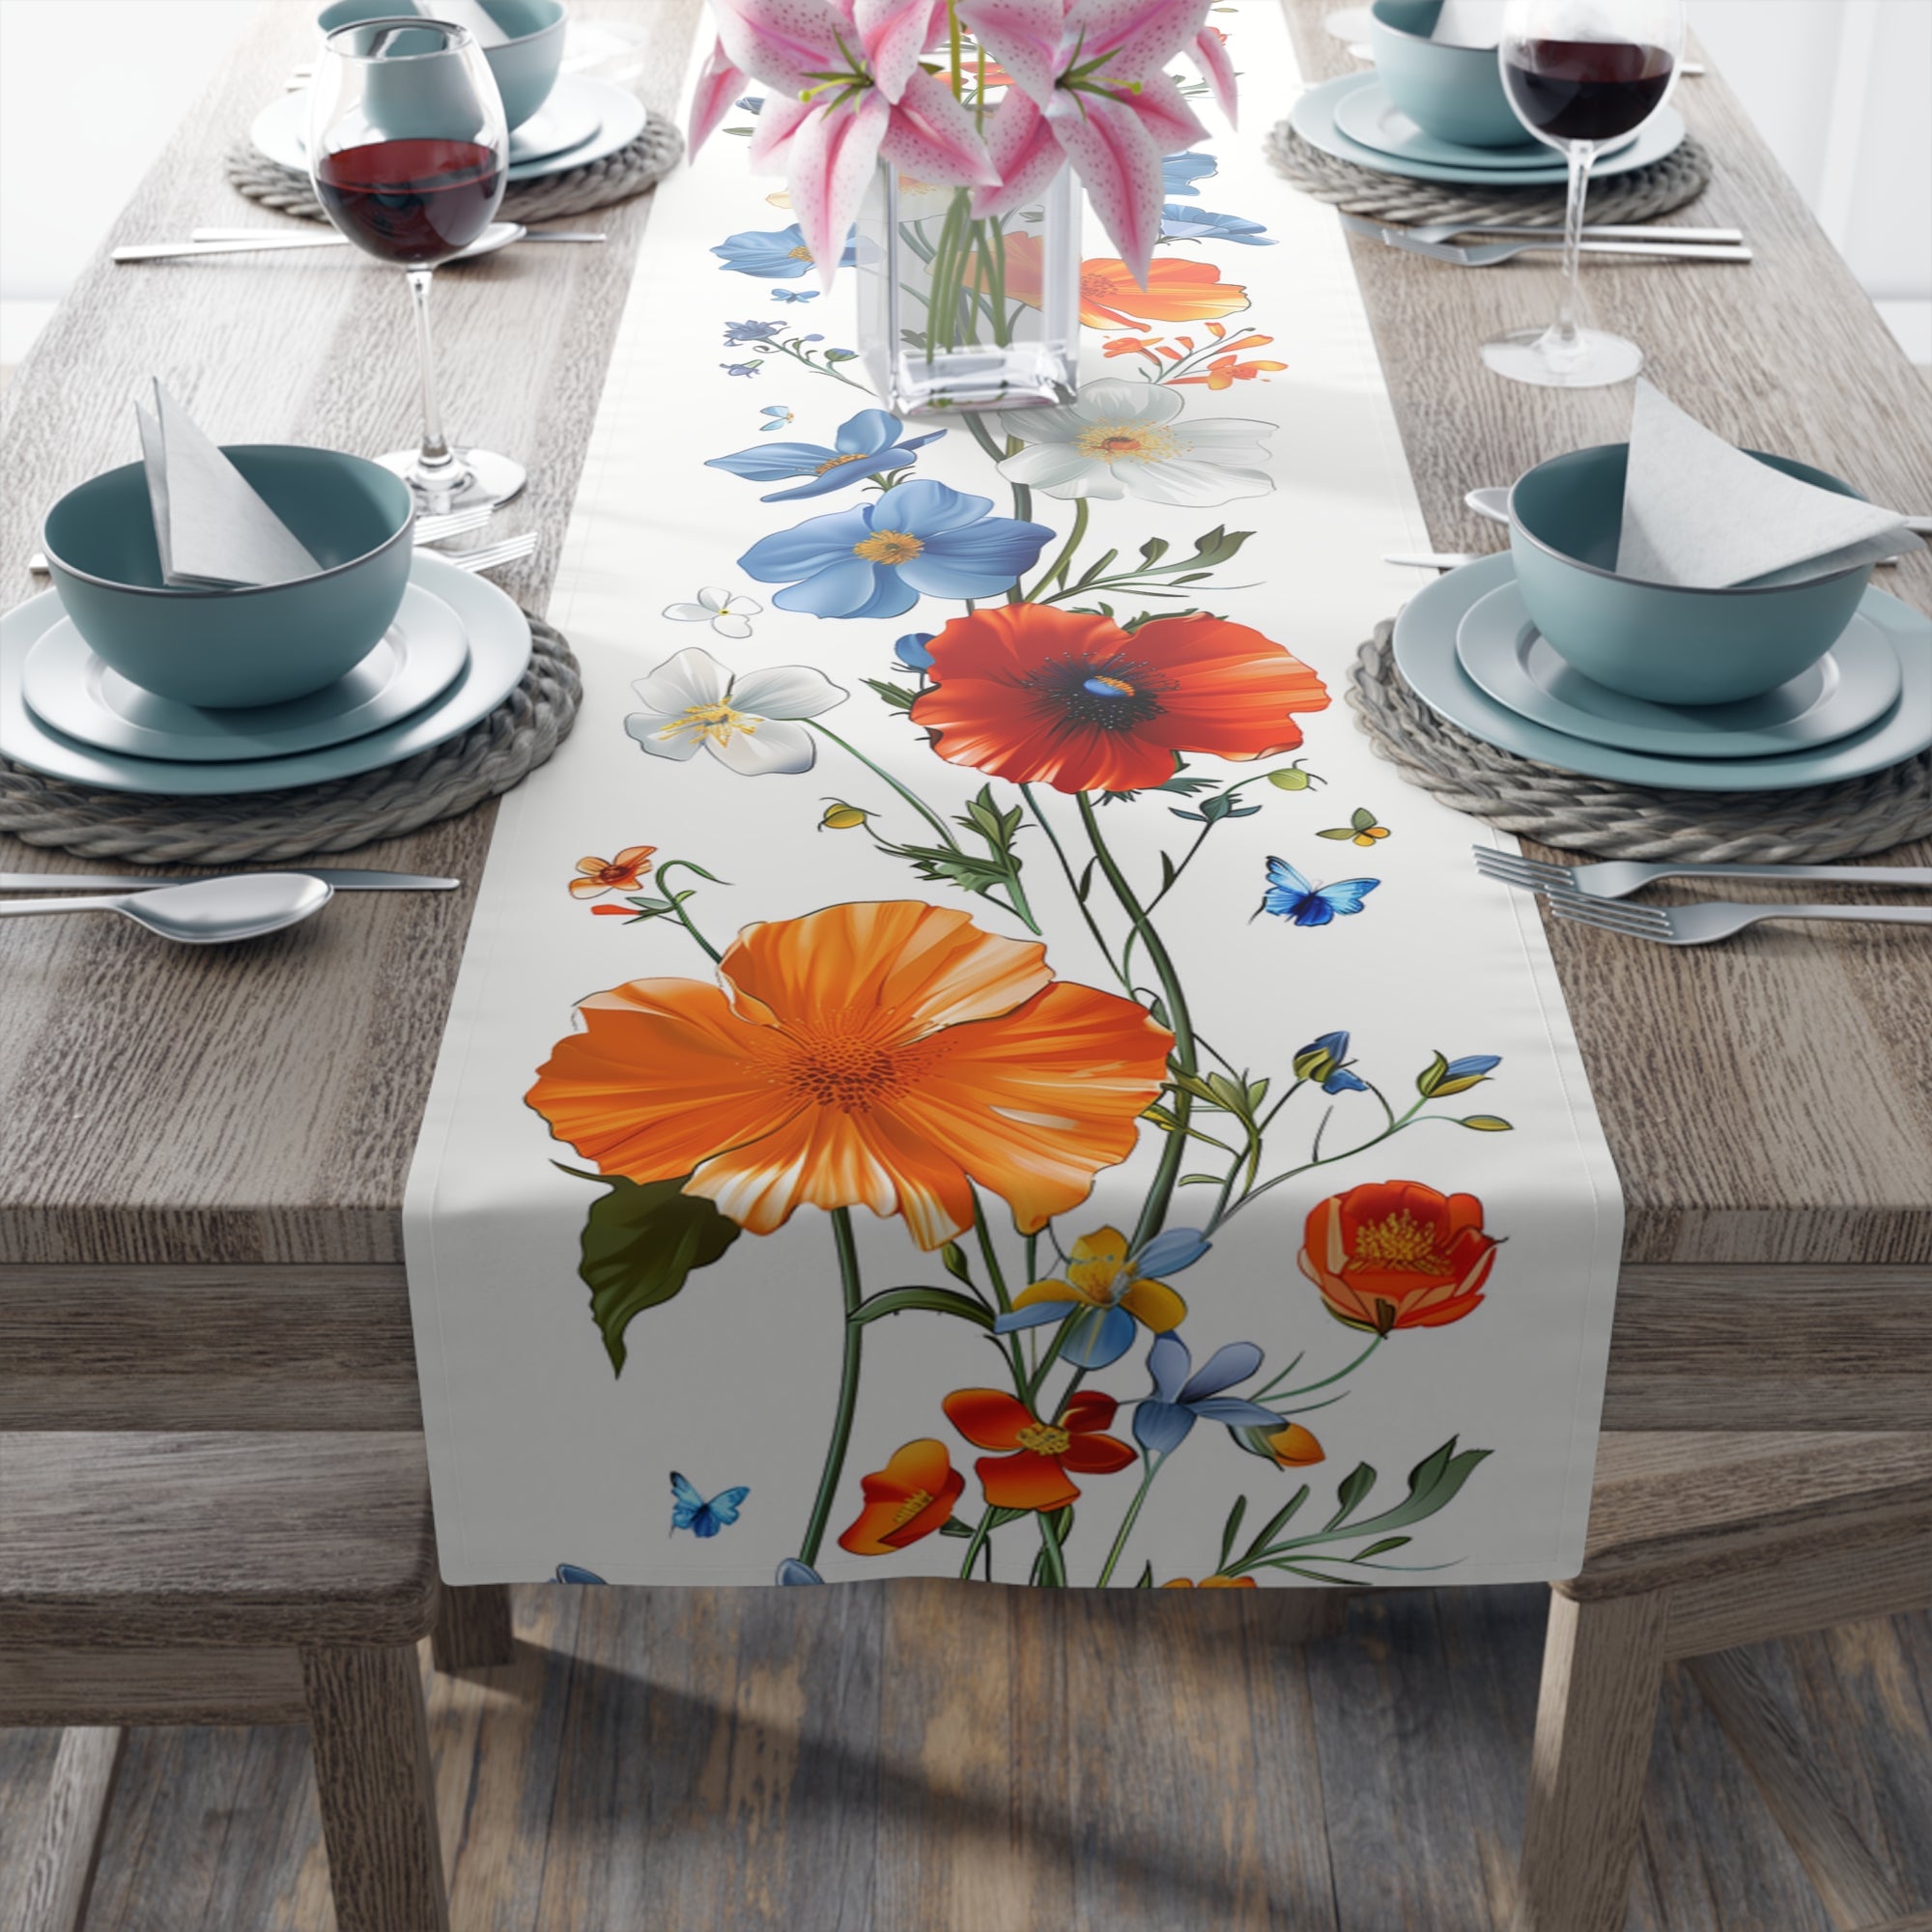 Super Bloom Table Runner with Spring Wildflower Floral Design (16" × 72")